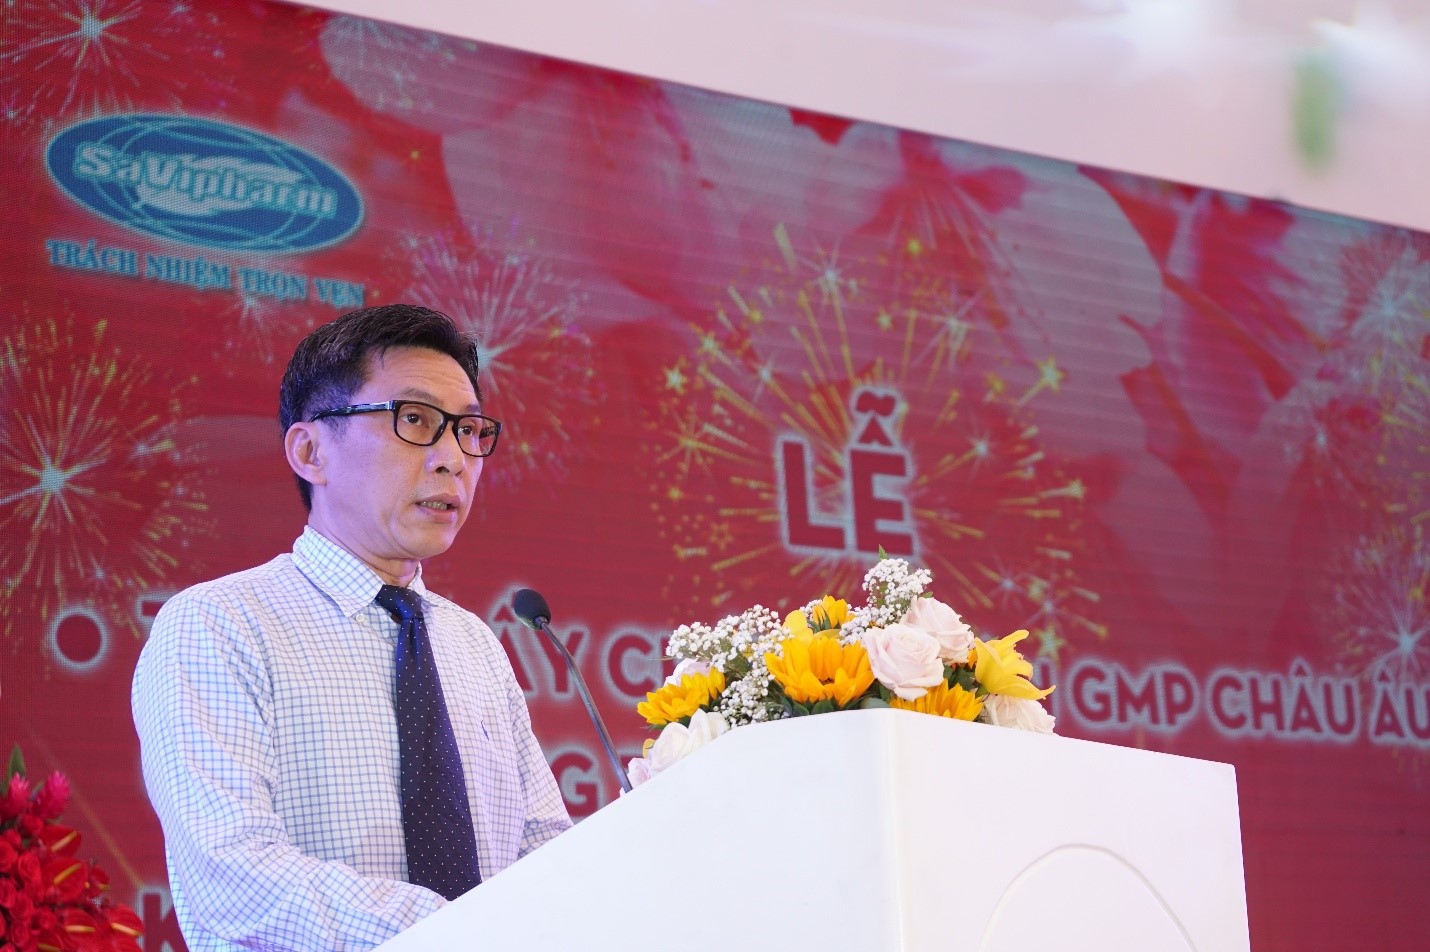 Dr. Nguyen Viet Dung, director of the Ho Chi Minh City Department of Science and Technology, speaks at a ceremony granting SaVipharm an EU Good Manufacturing Practice certificate in Ho Chi Minh City on January 7, 2020. Photo: SaVipharm